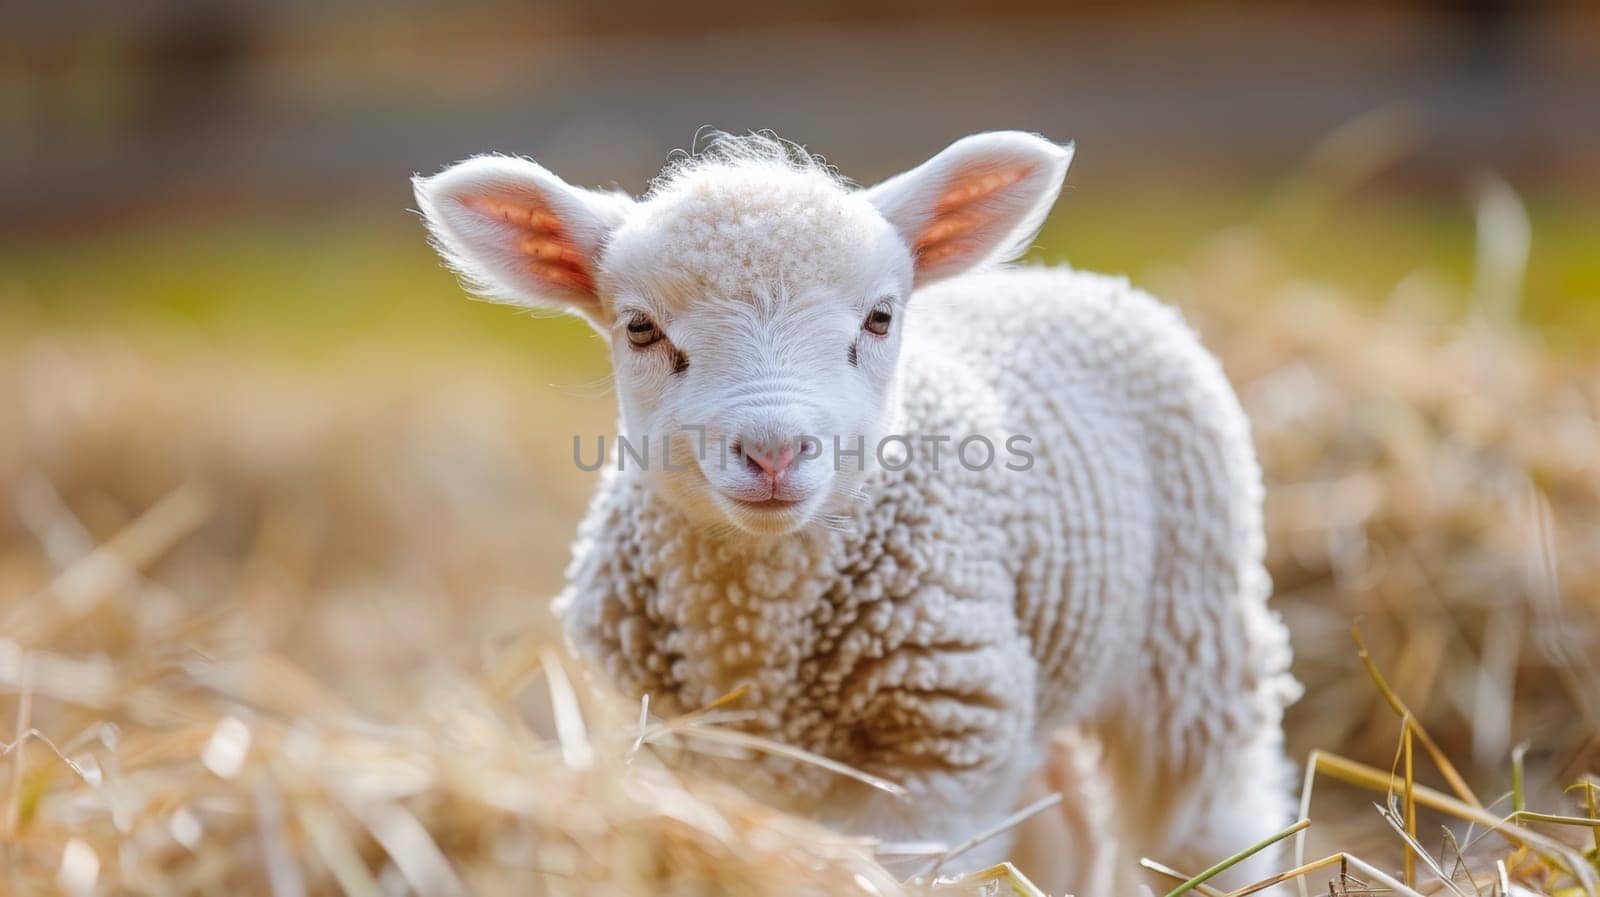 A baby lamb standing in a field of hay with grass, AI by starush